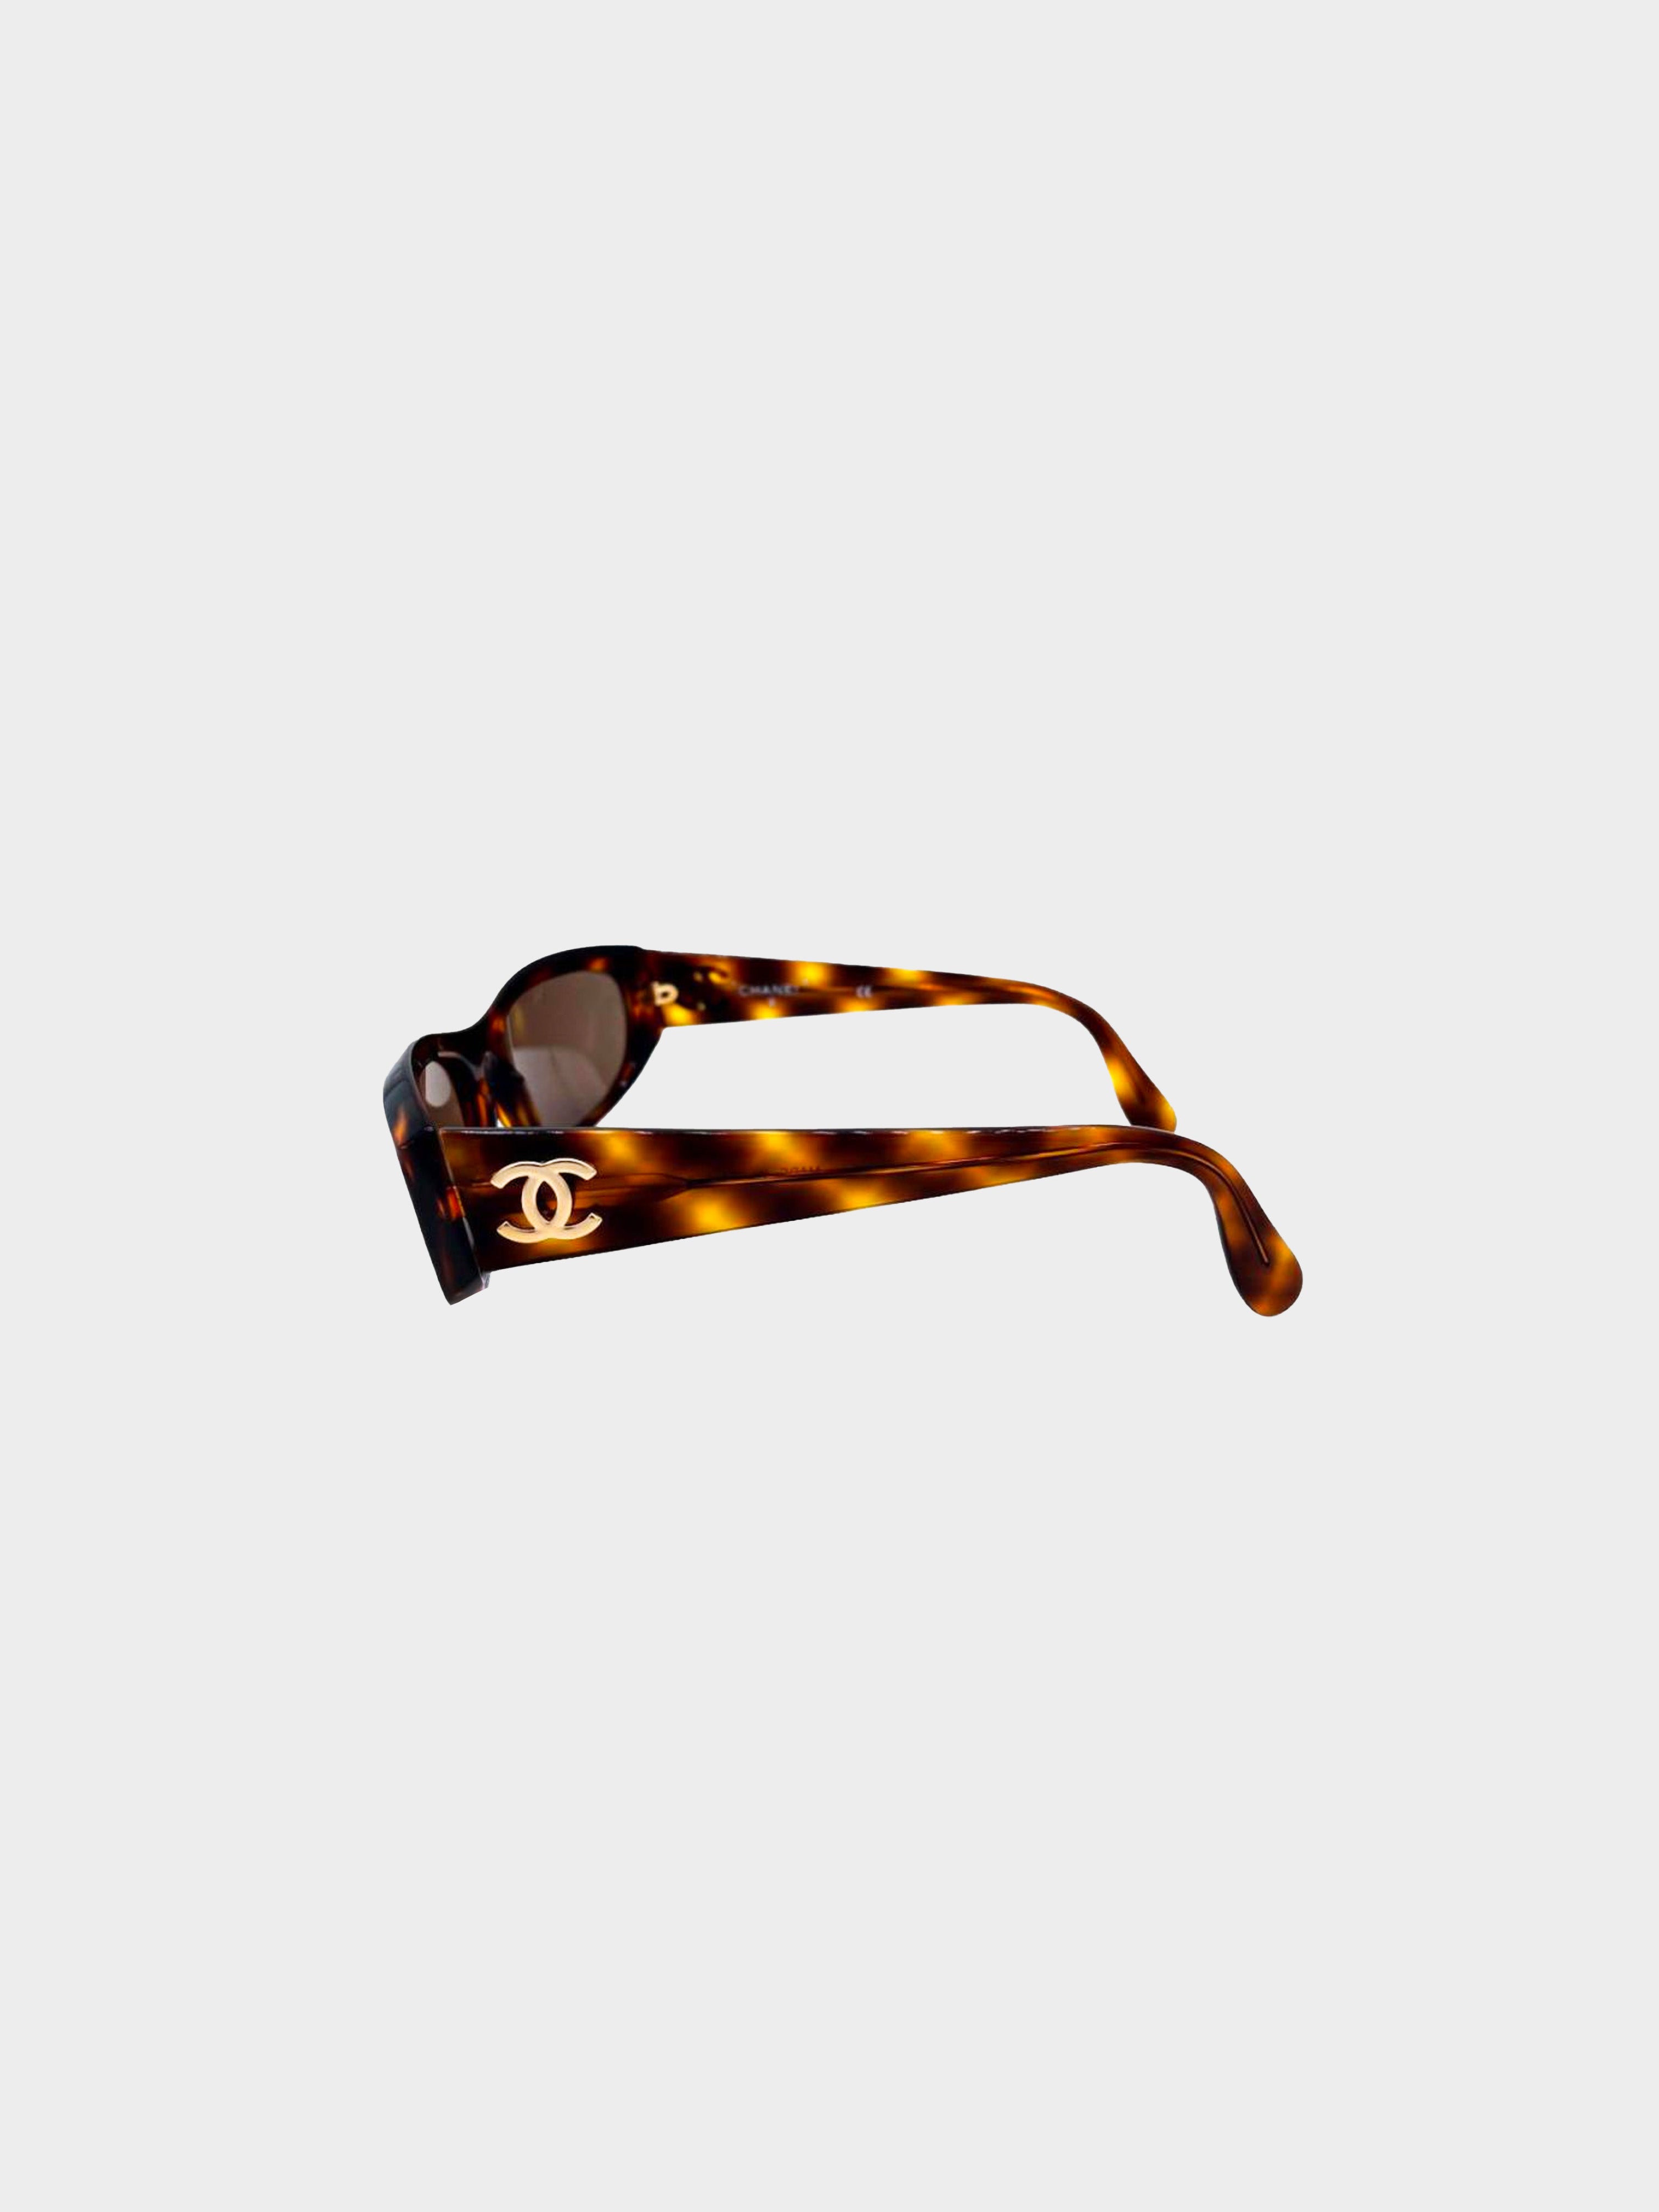 Vintage CHANEL Tortoise shell wrap sunglasses by Chanel